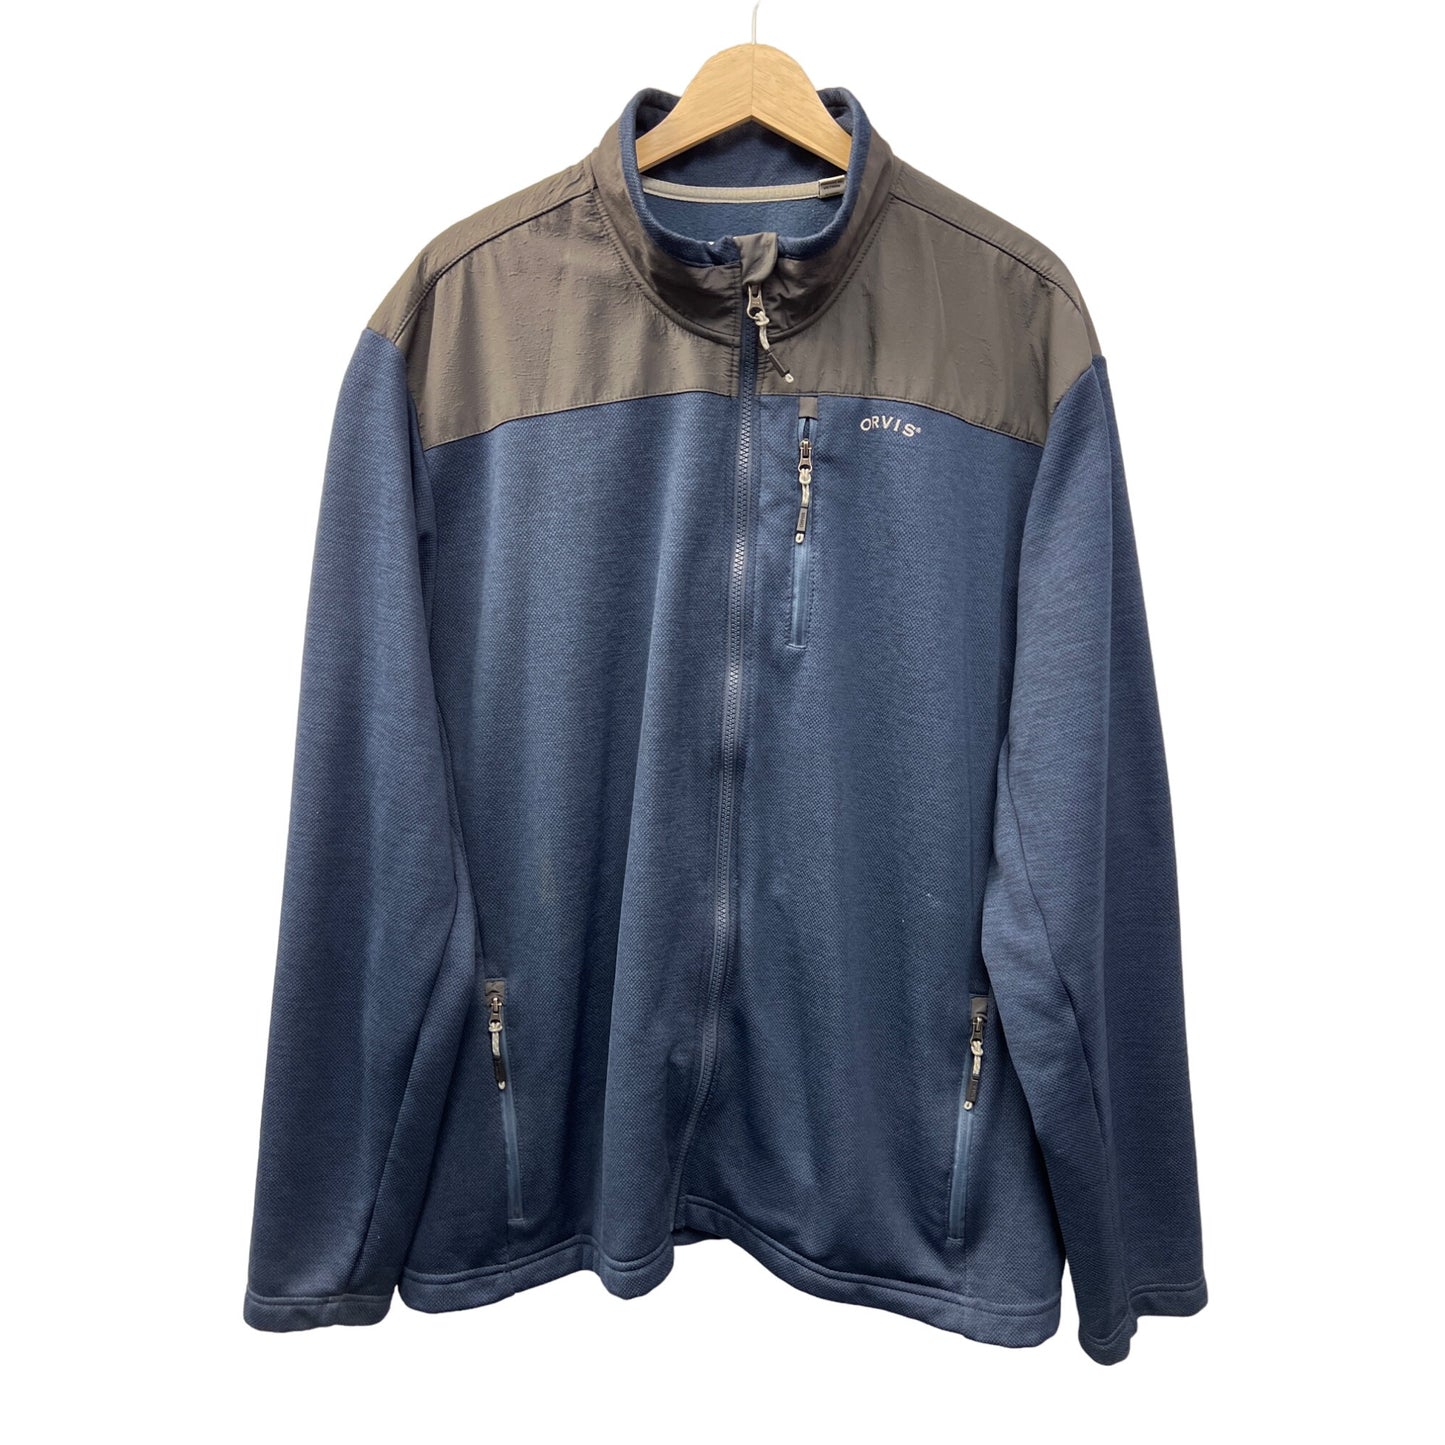 Orvis Full Zip Blue and Gray Soft Shell Jacket